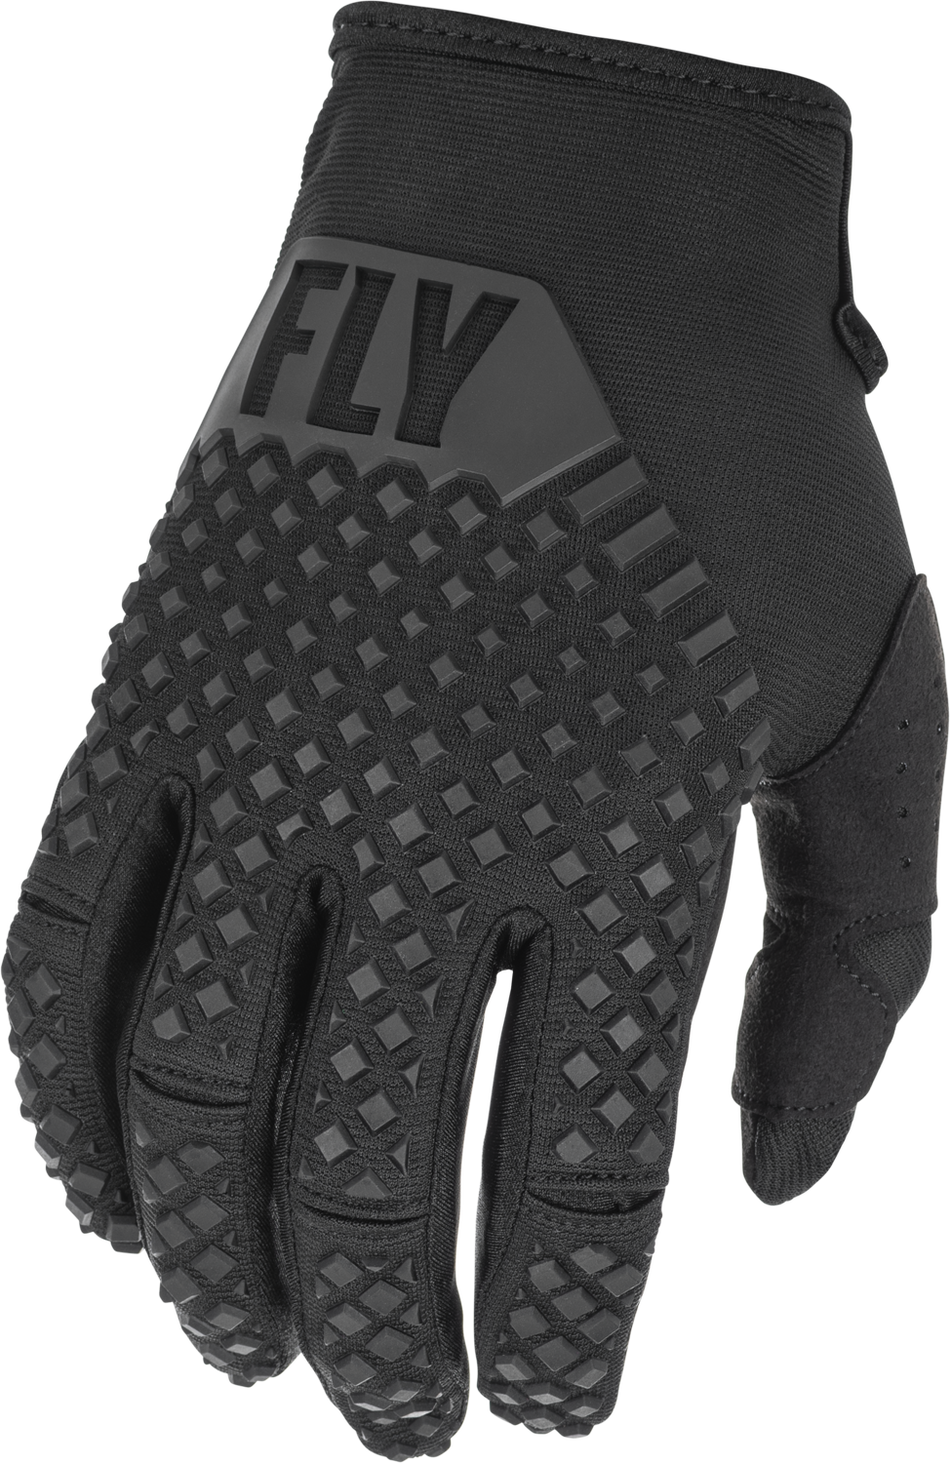 FLY RACING Youth Kinetic Gloves Black Ym 375-410YM